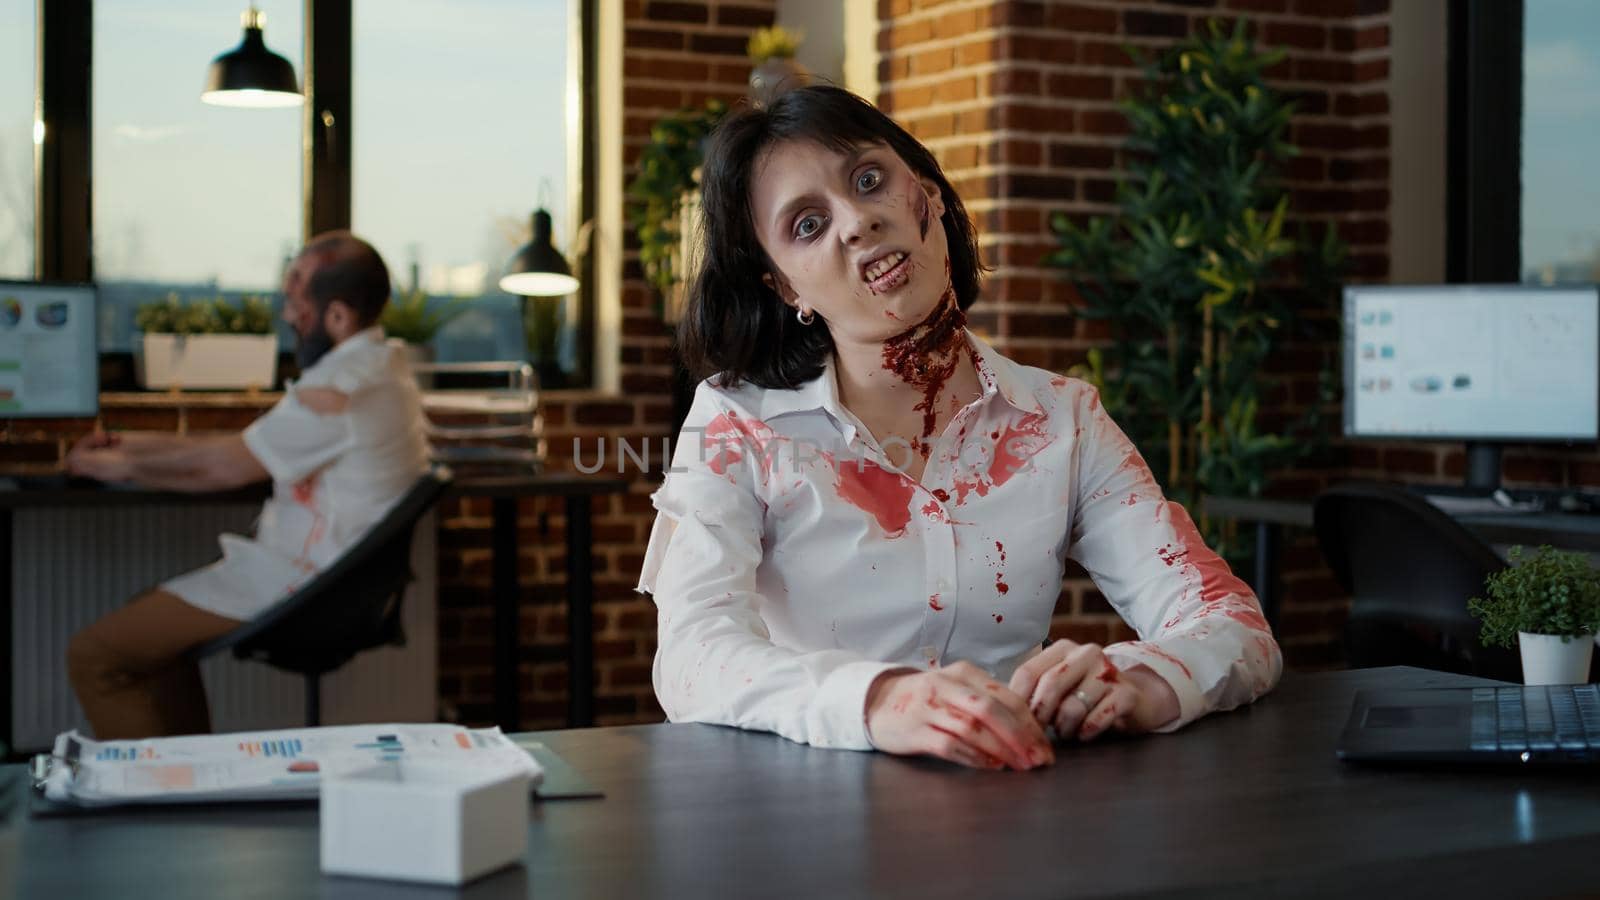 Scary zombie woman with bloody deep wounds in office waving hand at camera. Brain-eating creepy looking monster sitting at table in workspace while looking brain dead and evil.